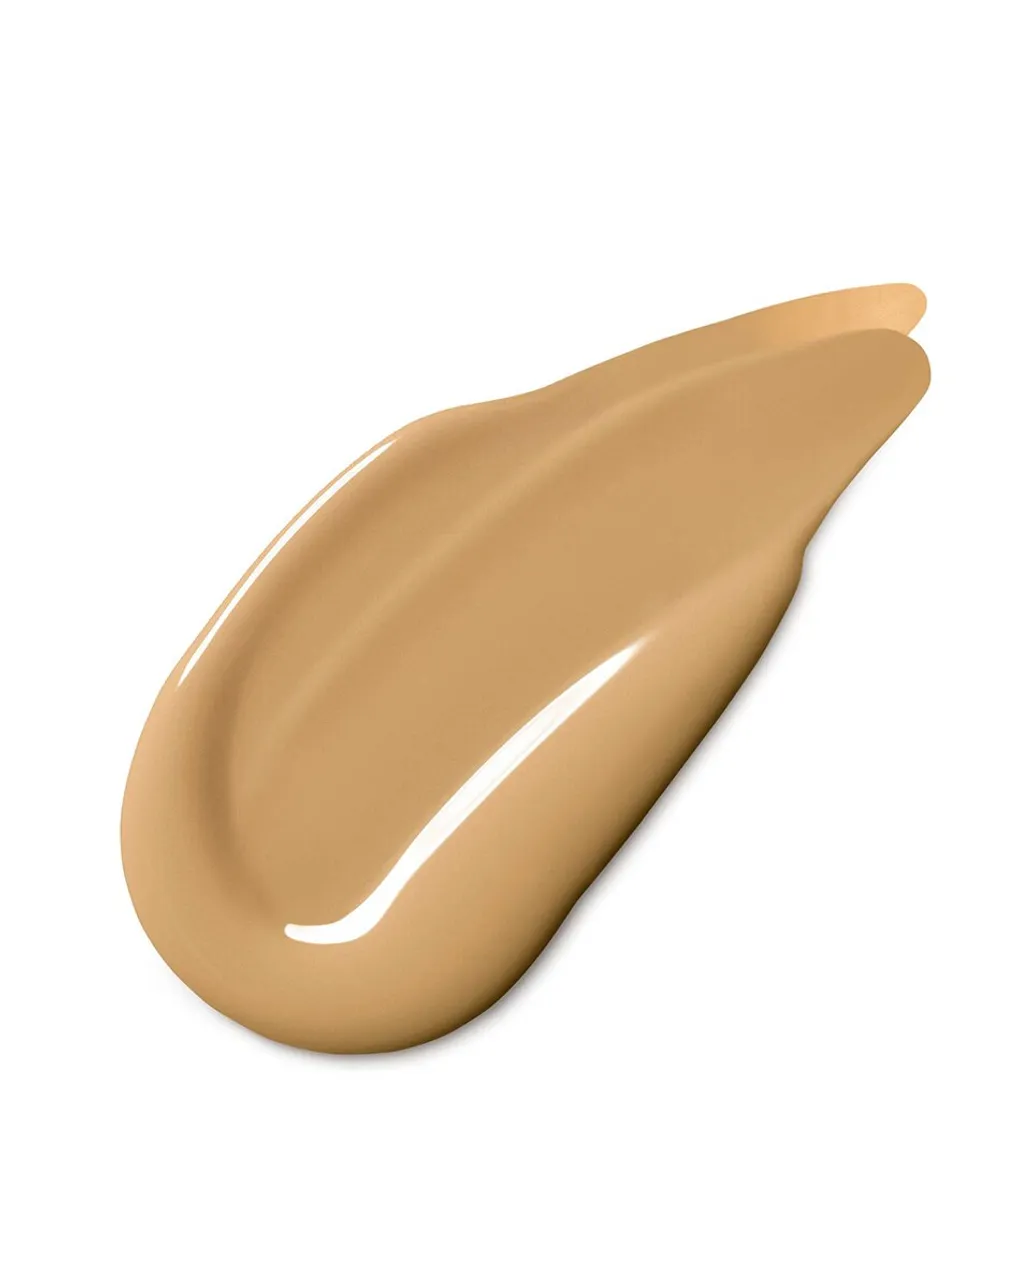 Clinique Even Better™ Clinical Serum Foundation HYDRATERENDE &